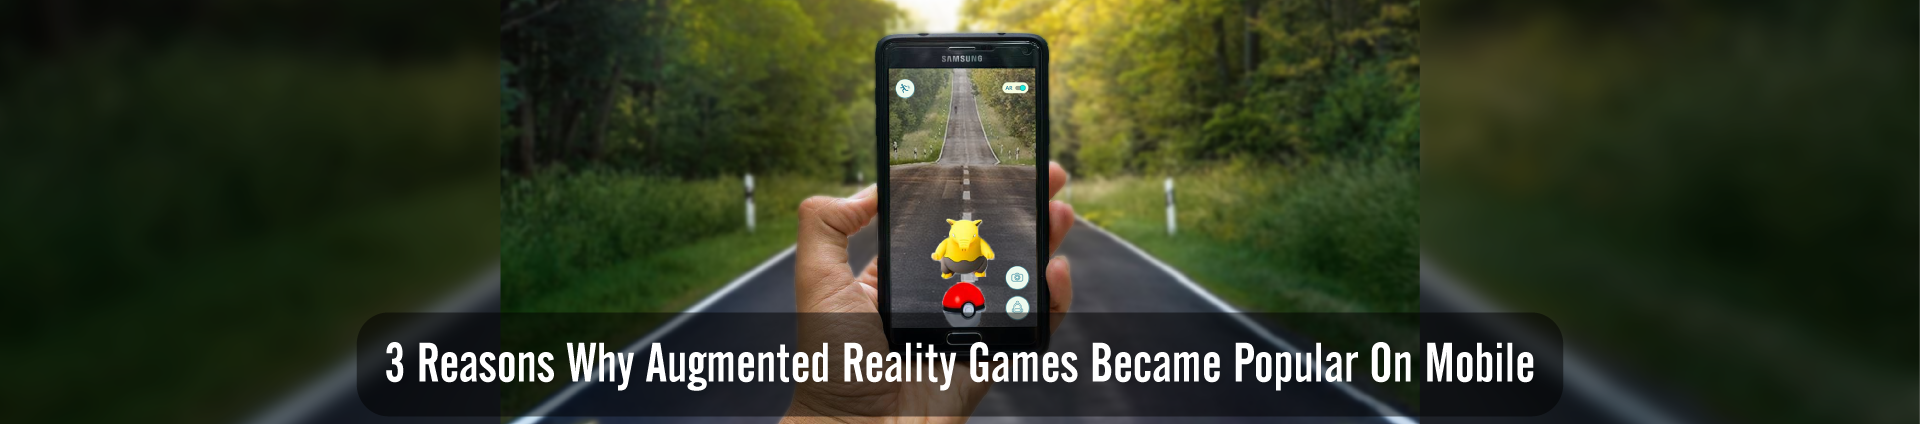 Popularity of Augmented Reality Games